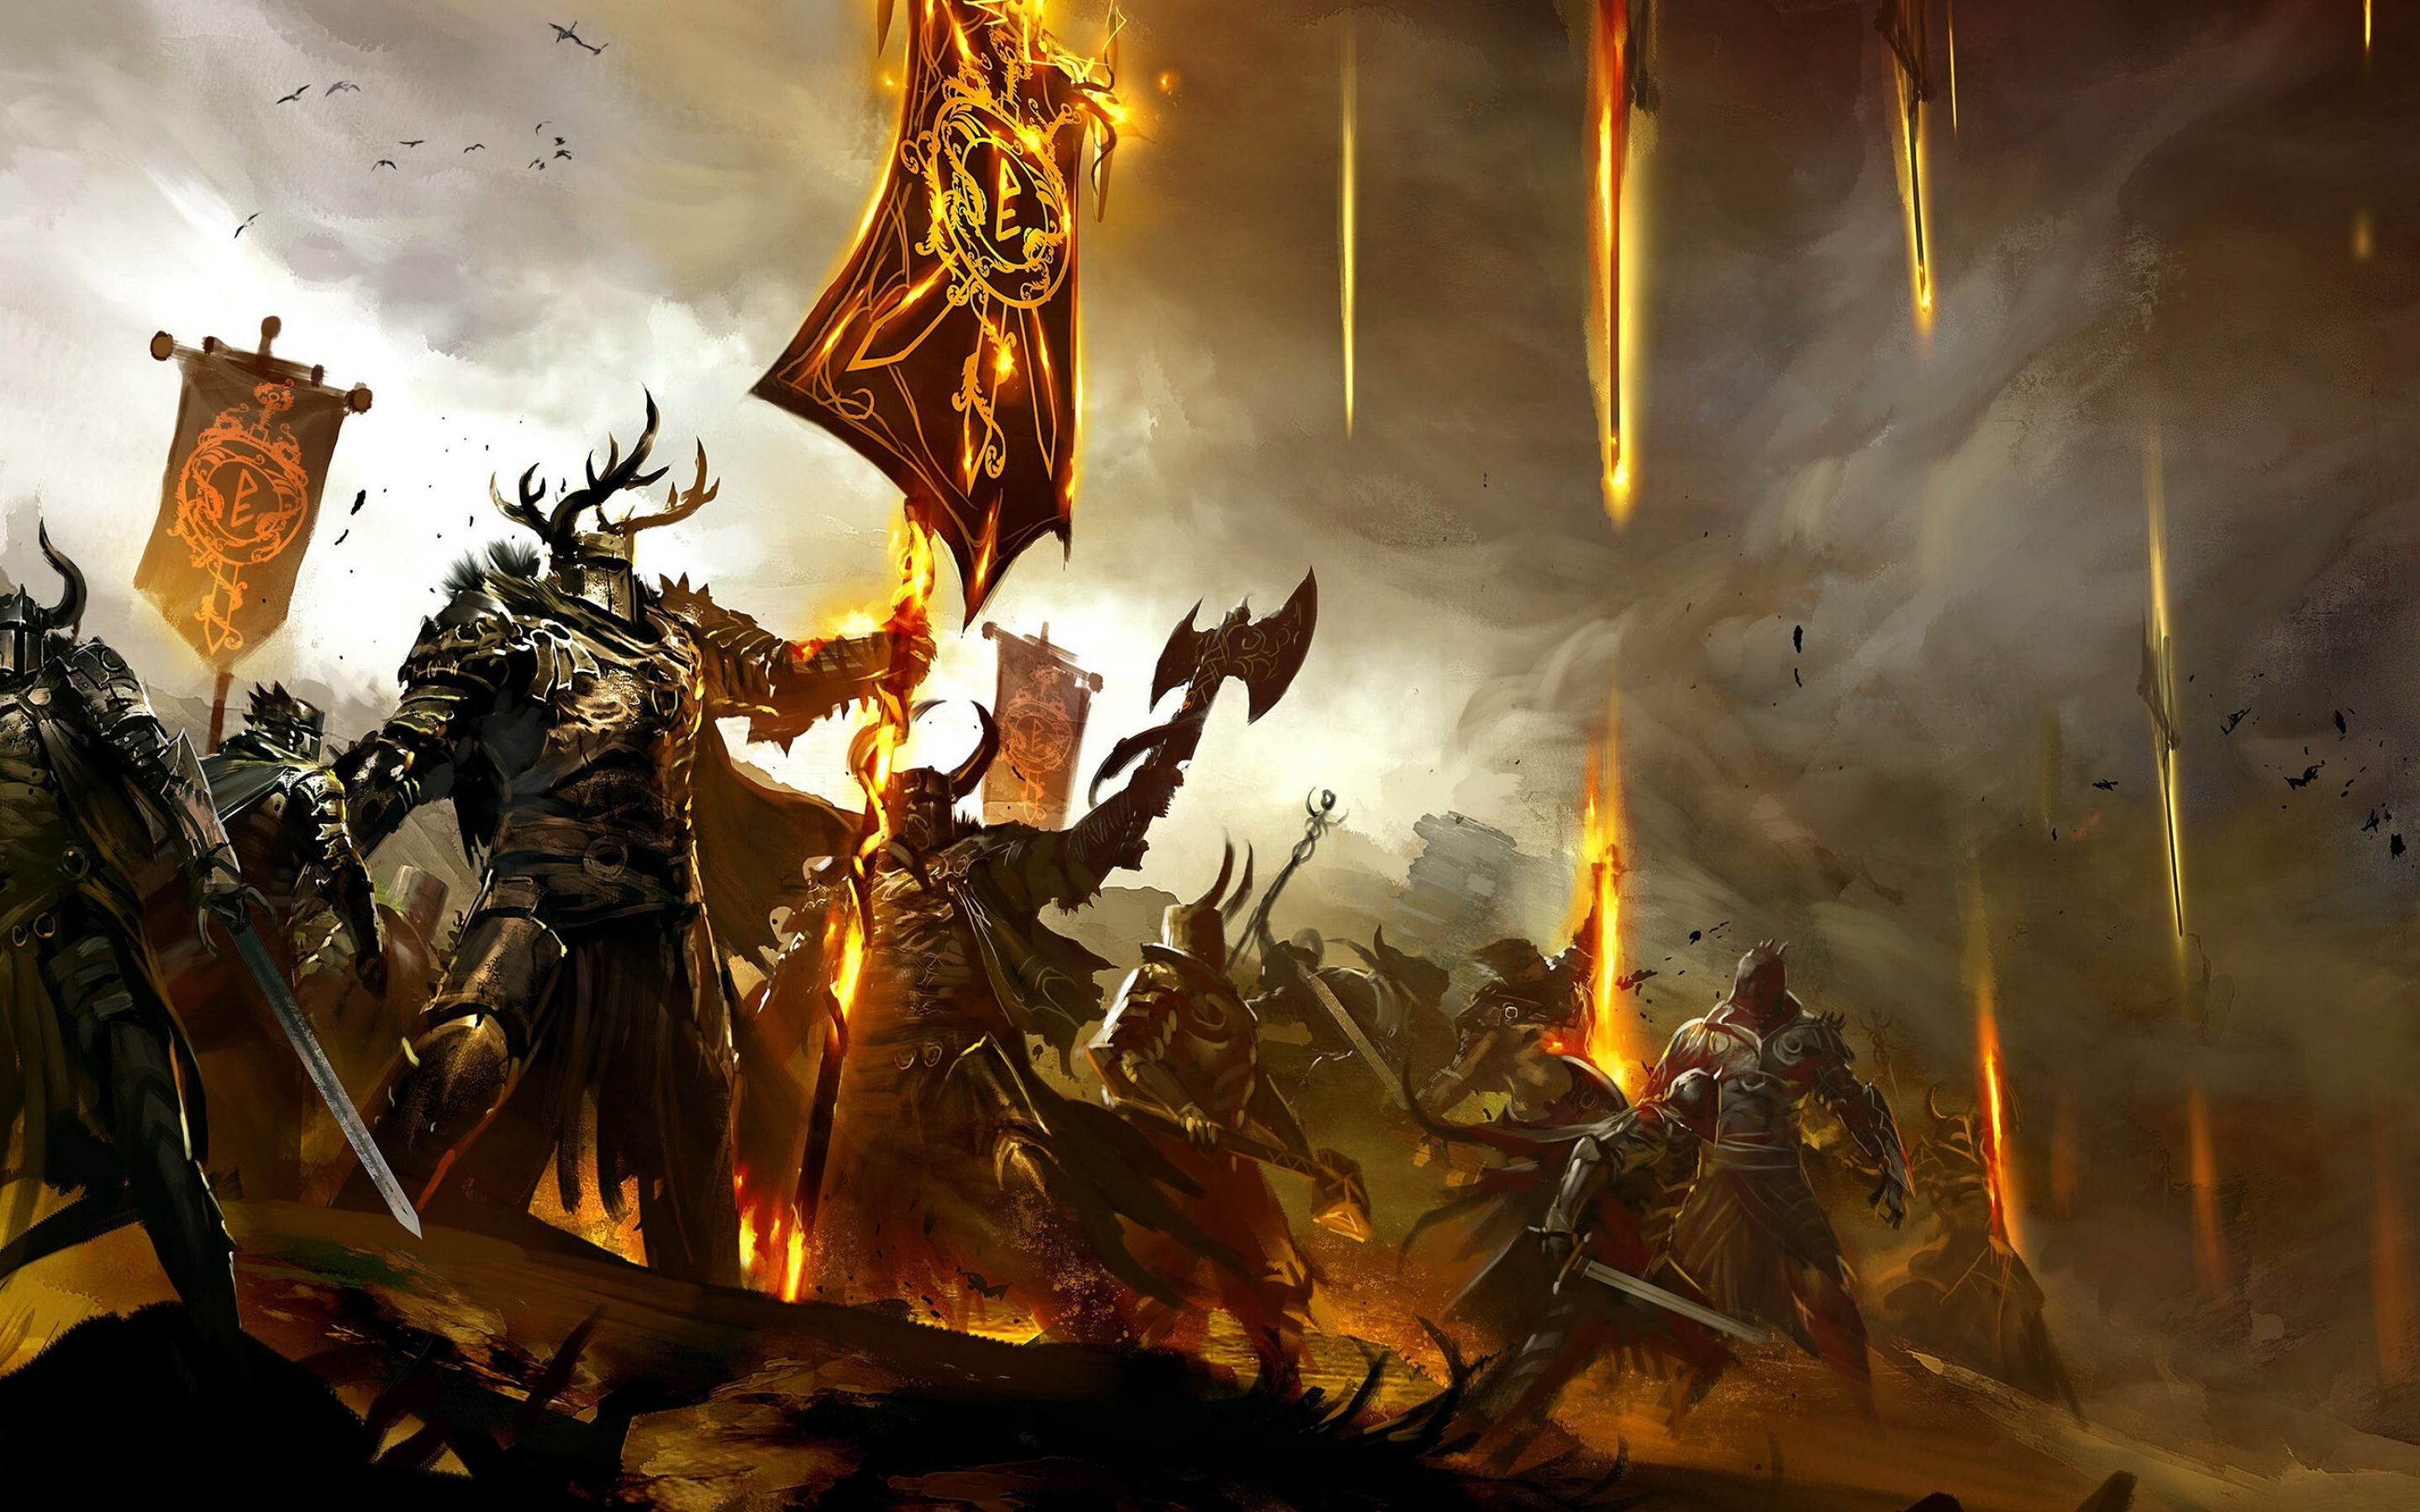 Guild Wars: The fourth major entry in the GW series, Developed by ArenaNet. 2880x1800 HD Wallpaper.